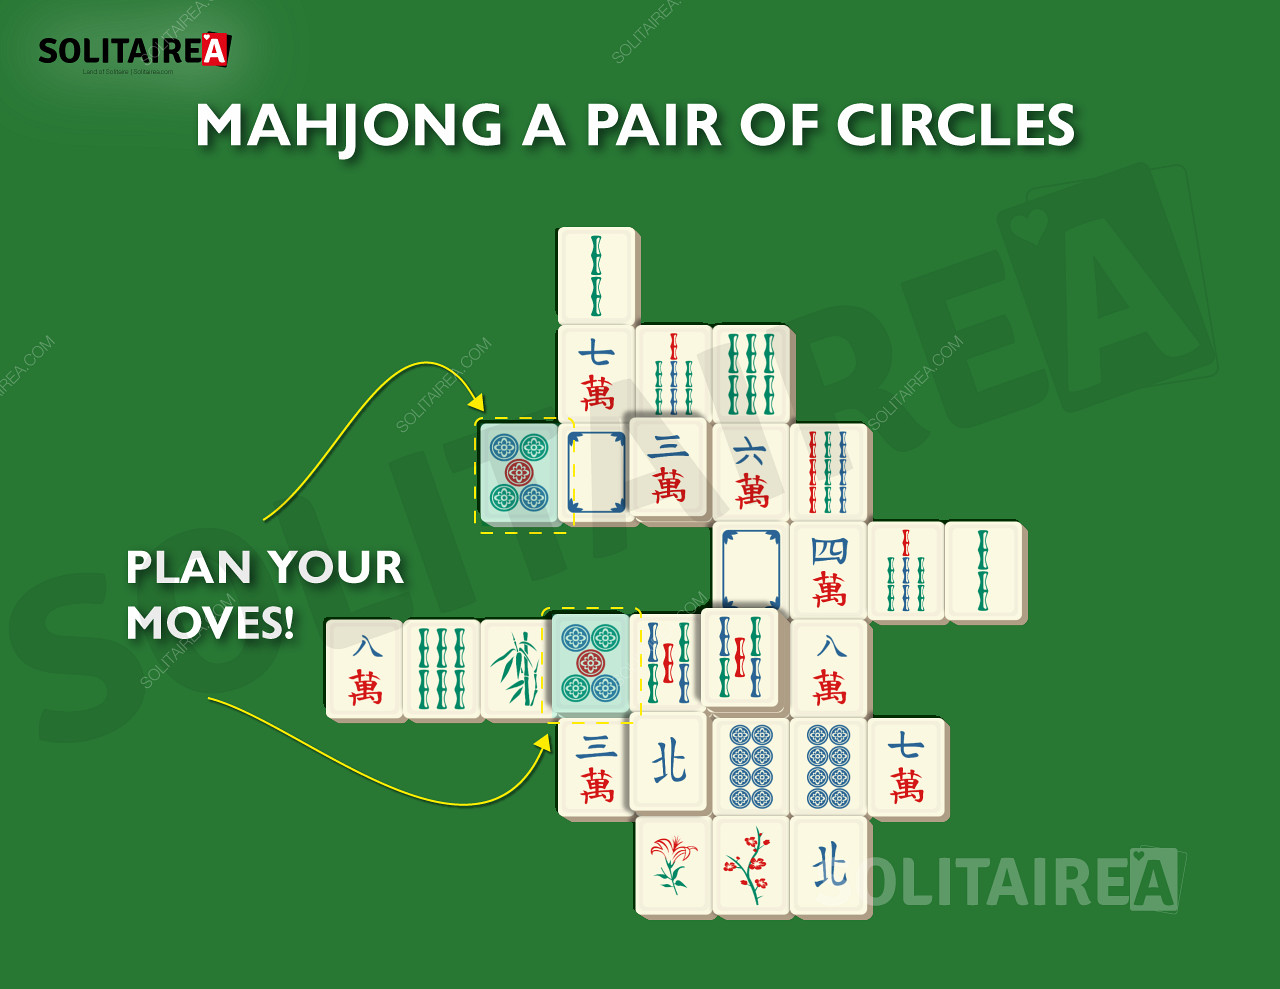 Image showing how to plan your moves as a way to develop a winning strategy.